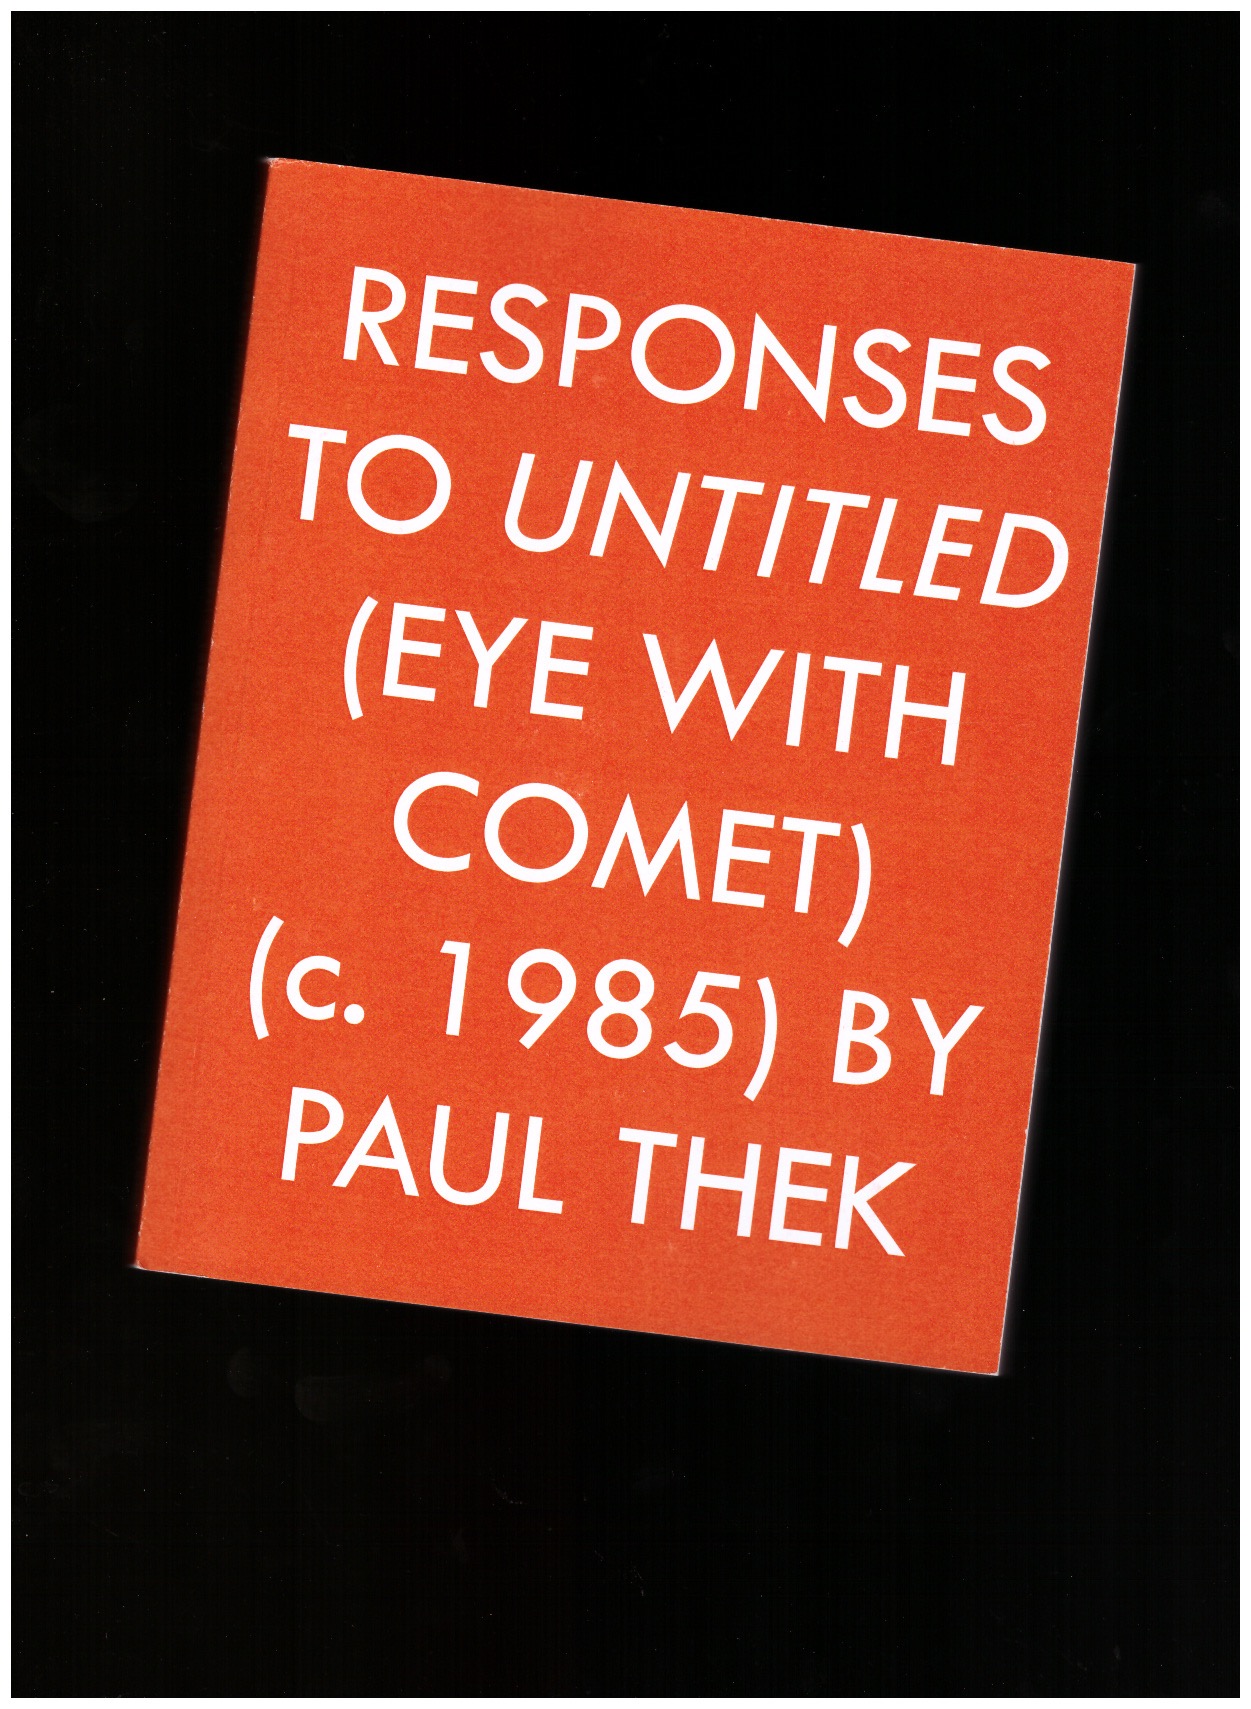 BENSON MILLER, Peter (ed.) - Responses to Untitled (eye with comet) Paul Thek